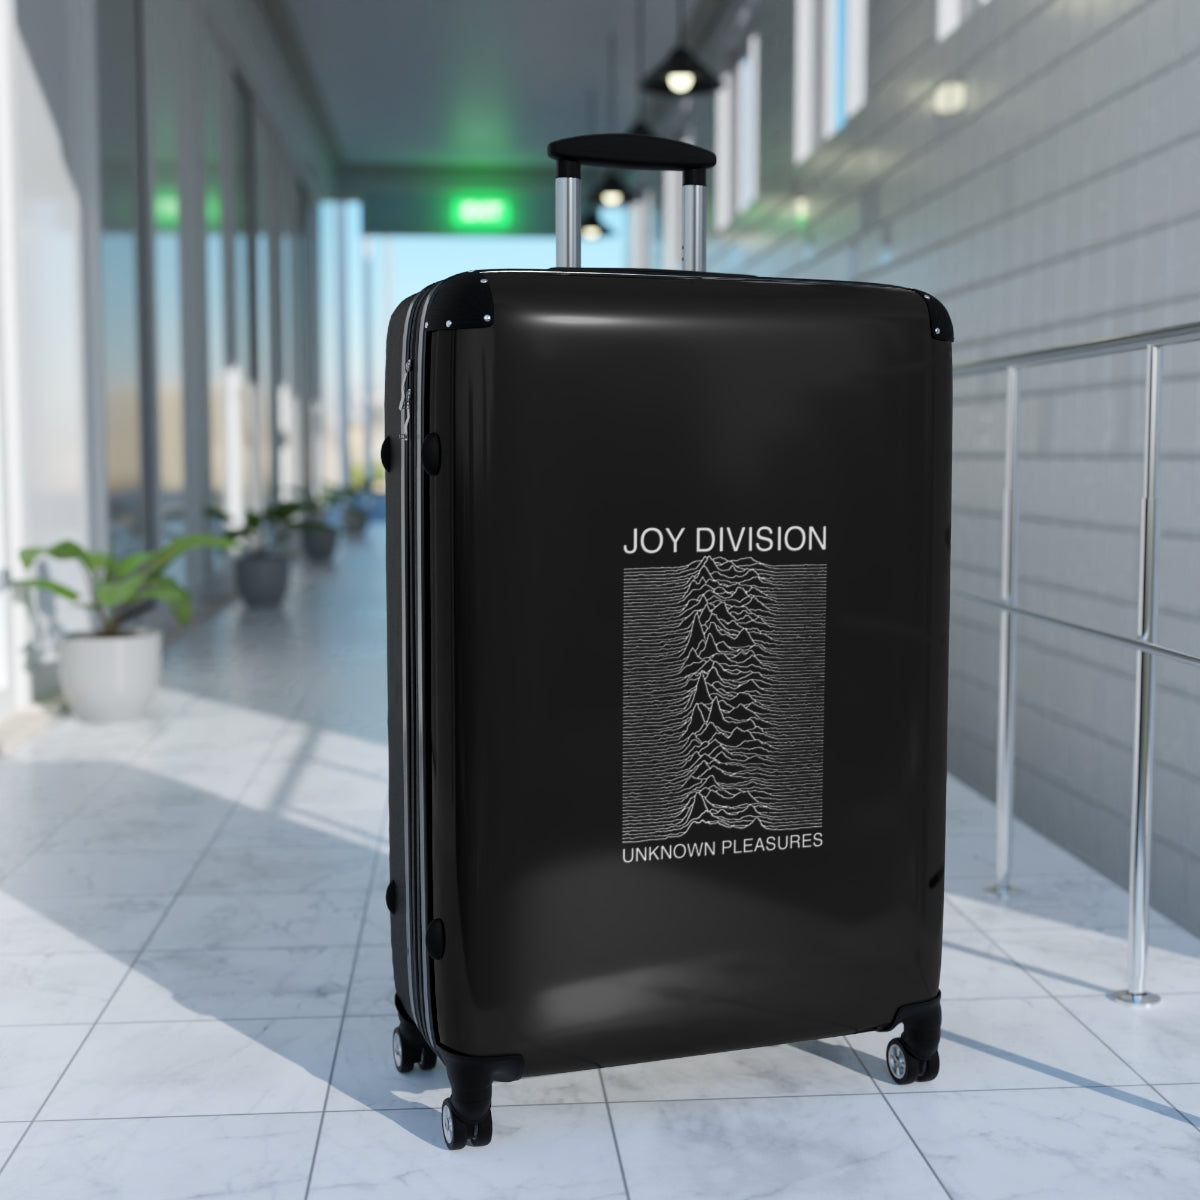 Getrott Joy Division Unknown Pleasures 1979 Black Cabin Suitcase Inner Pockets Extended Storage Adjustable Telescopic Handle Inner Pockets Double wheeled Polycarbonate Hard-shell Built-in Lock